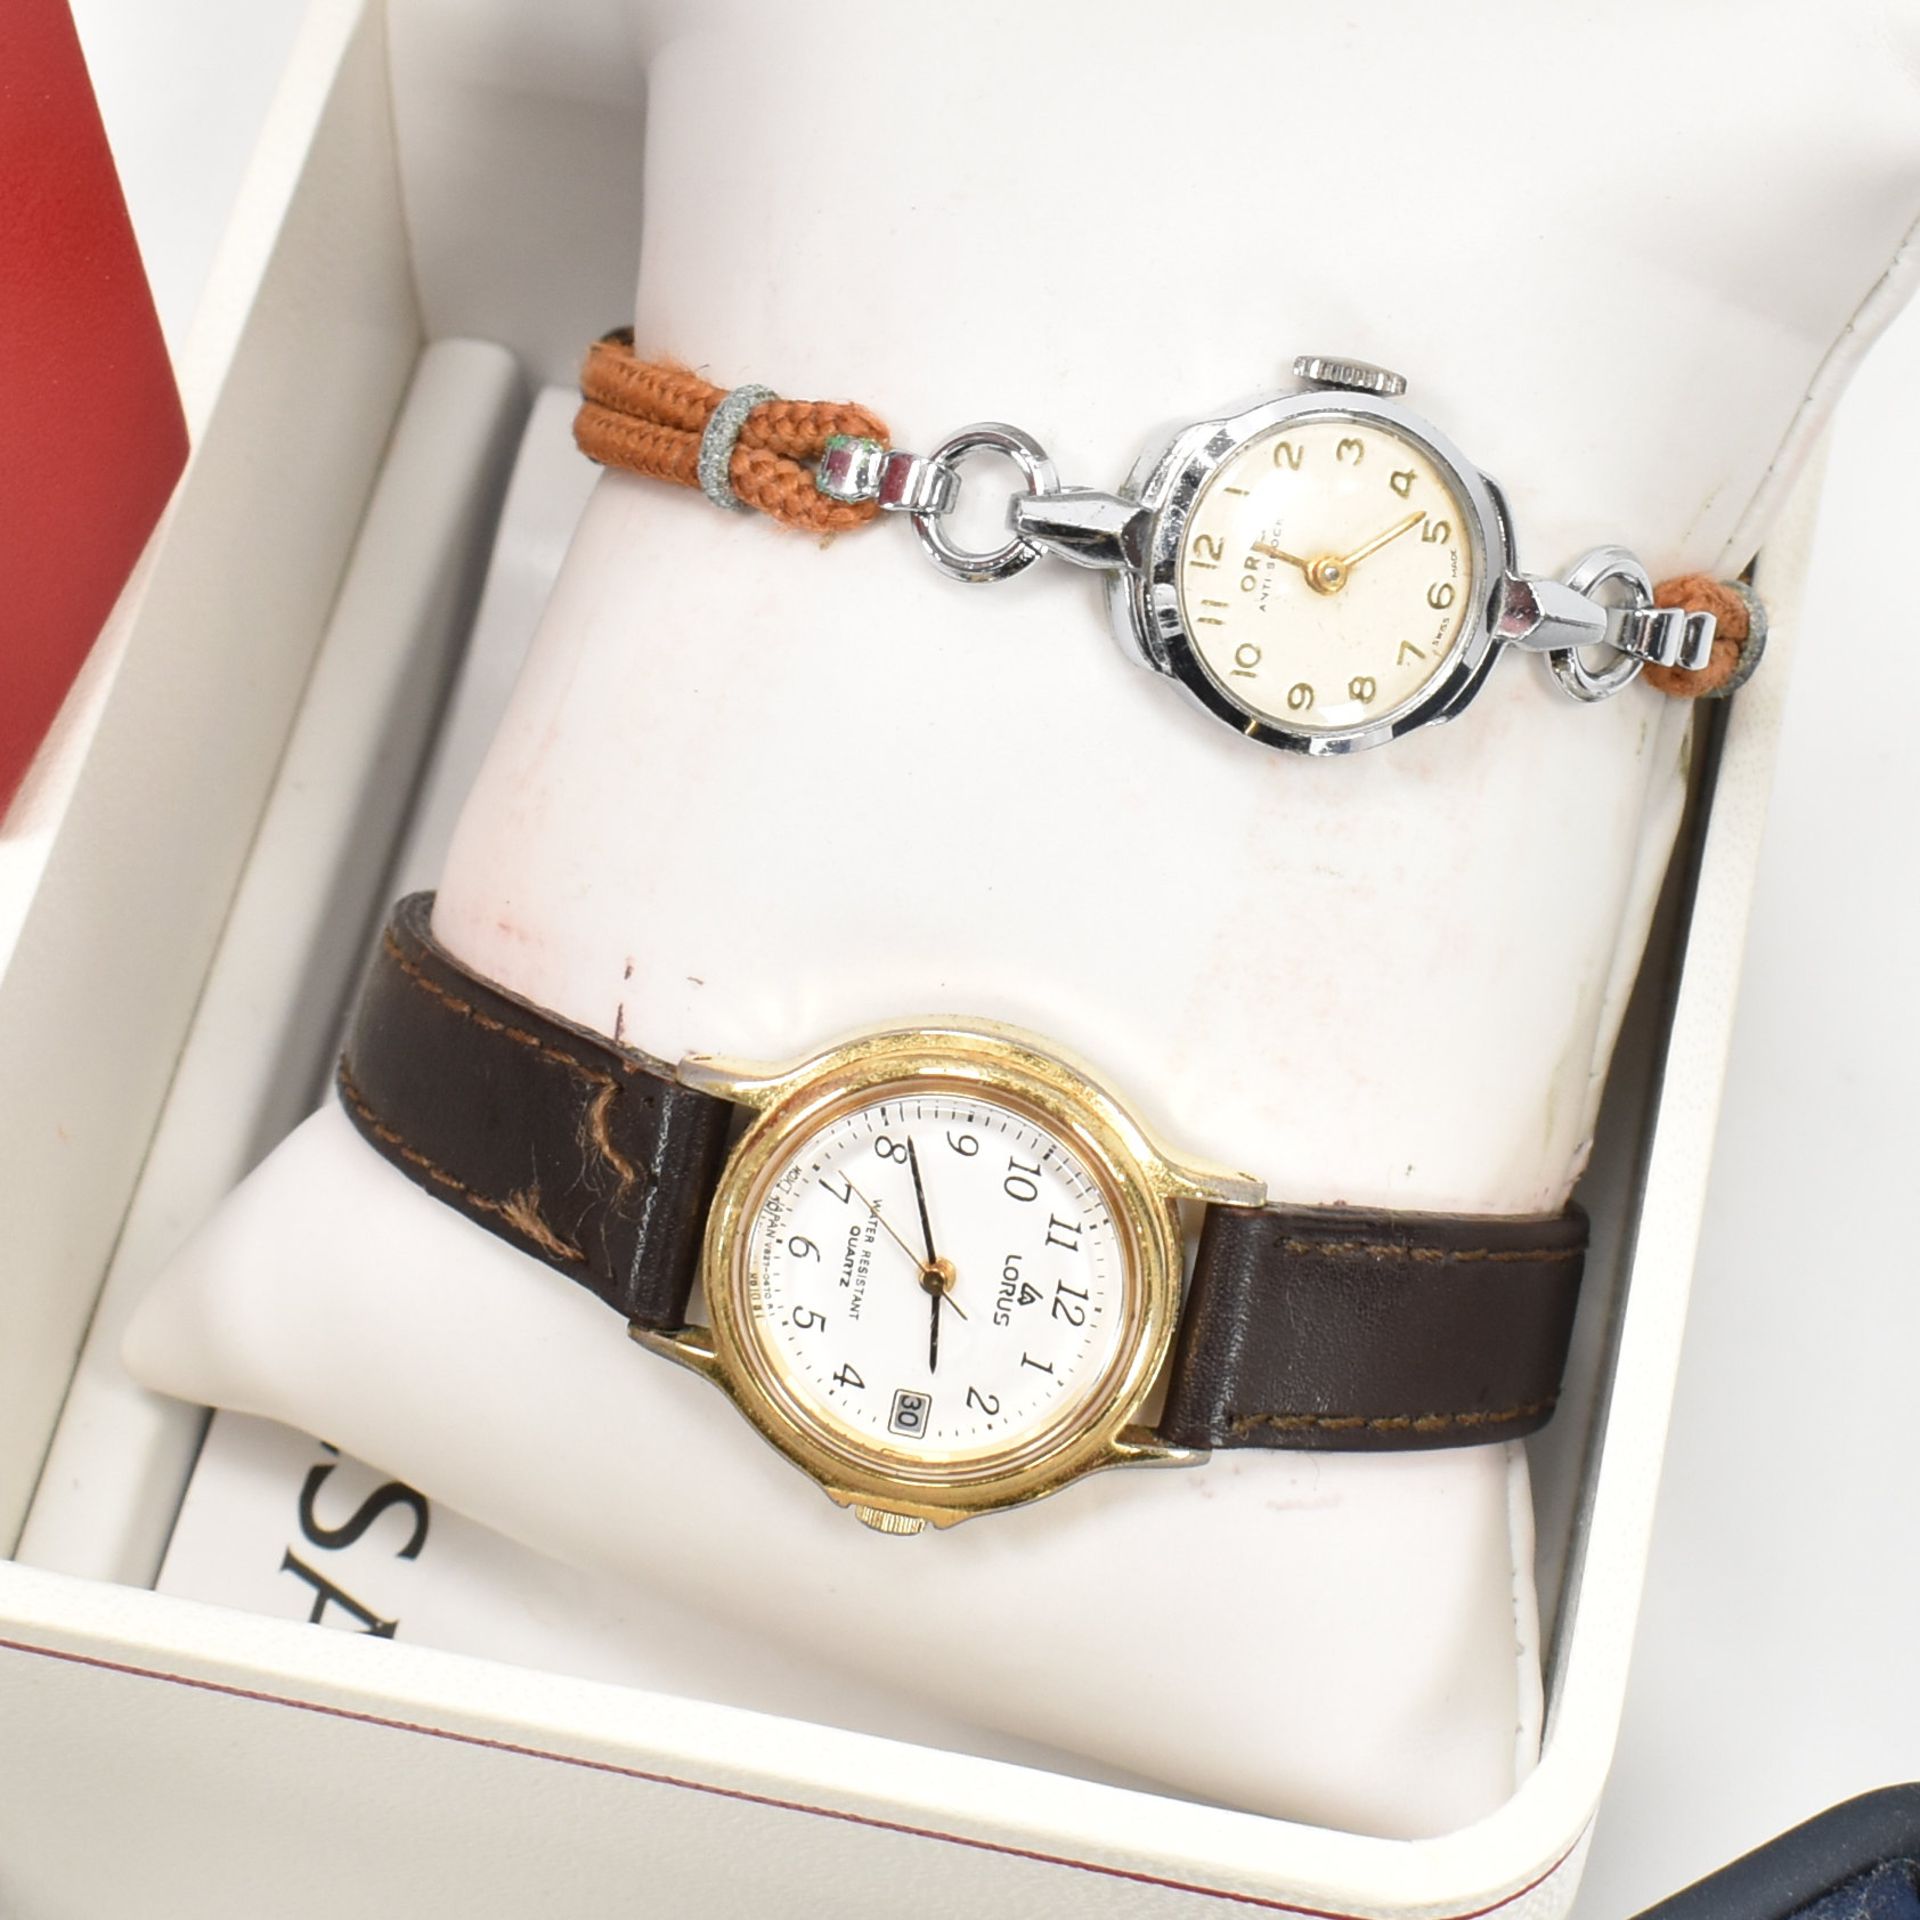 COLLECTION OF VINTAGE WRIST WATCHES - Image 6 of 9